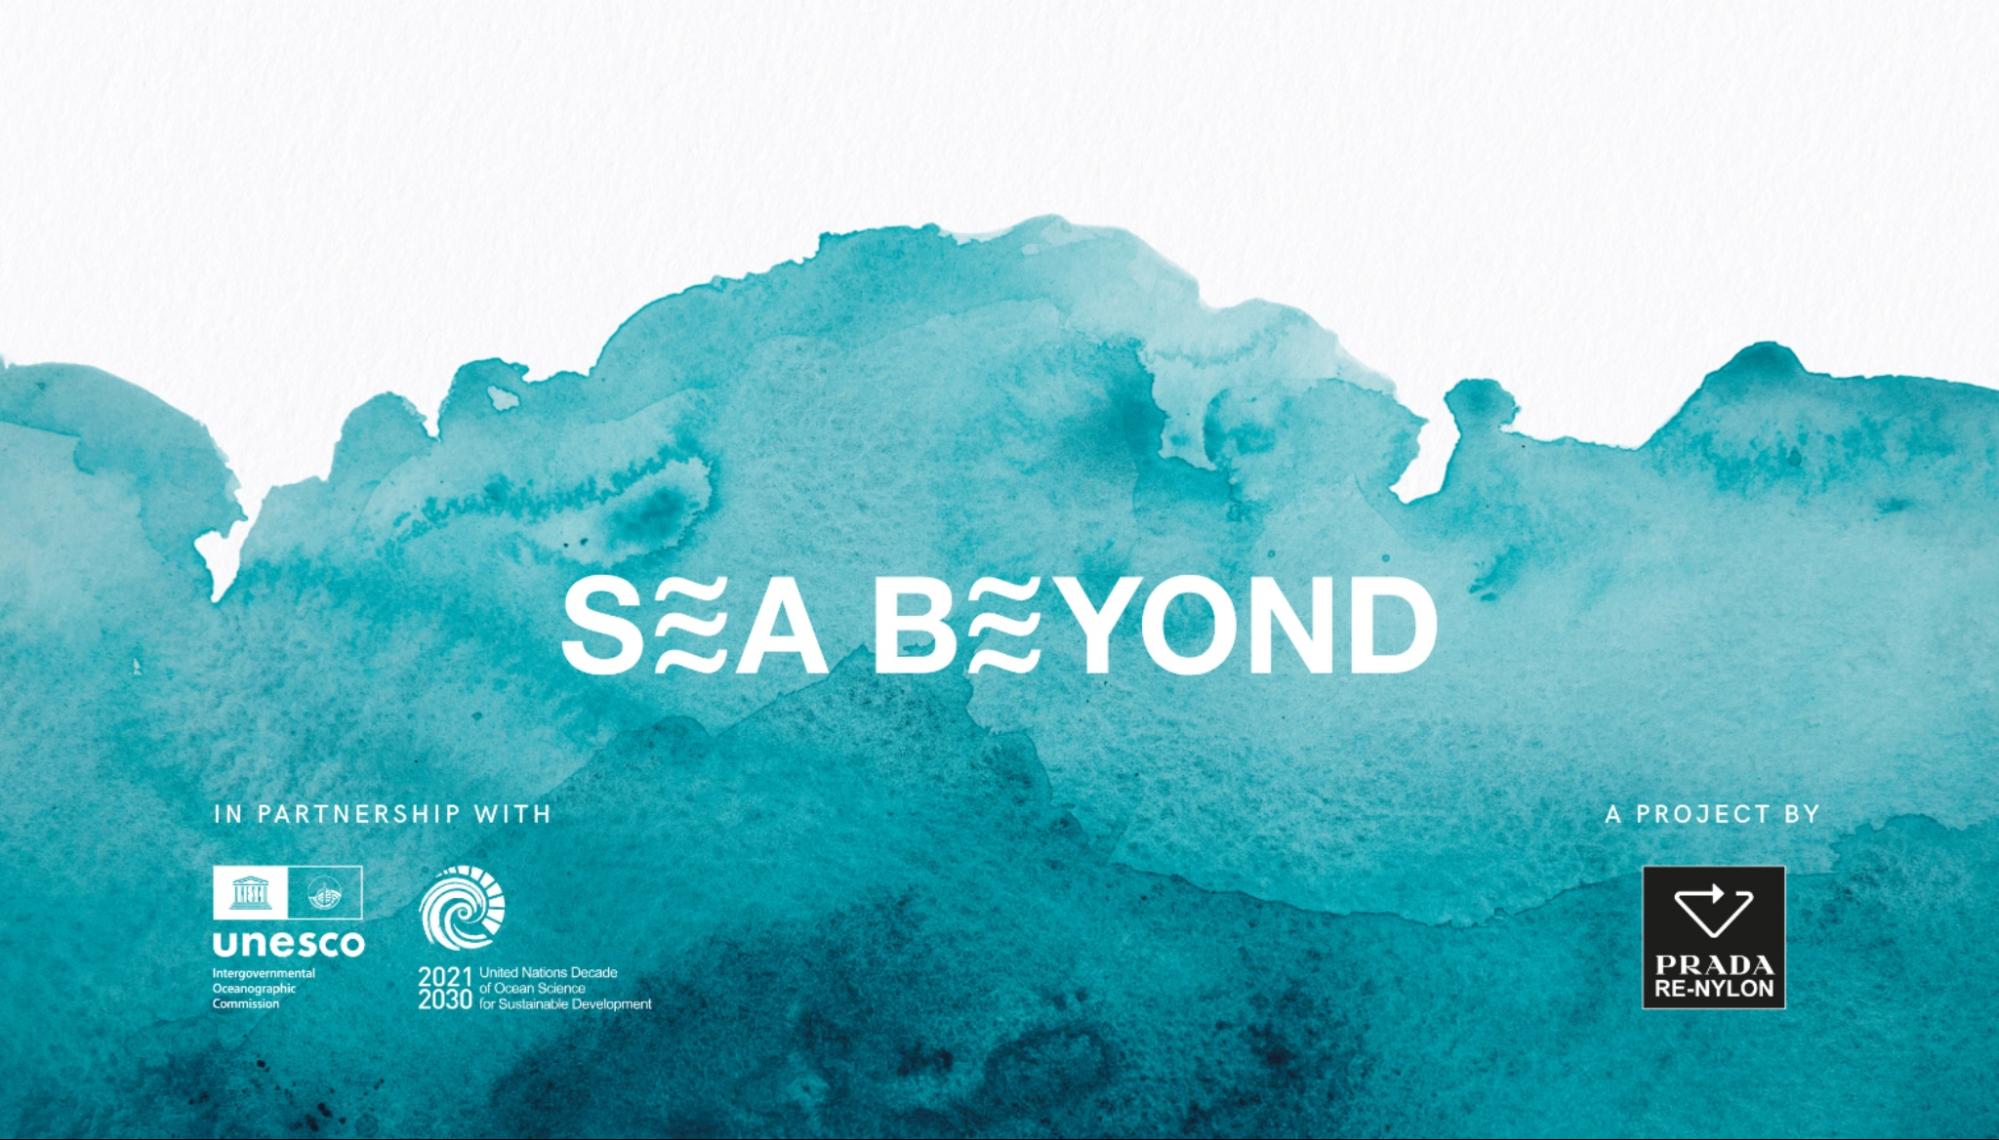 SEA Game Awards 2022 Announces Finalists From Southeast Asia and Beyond